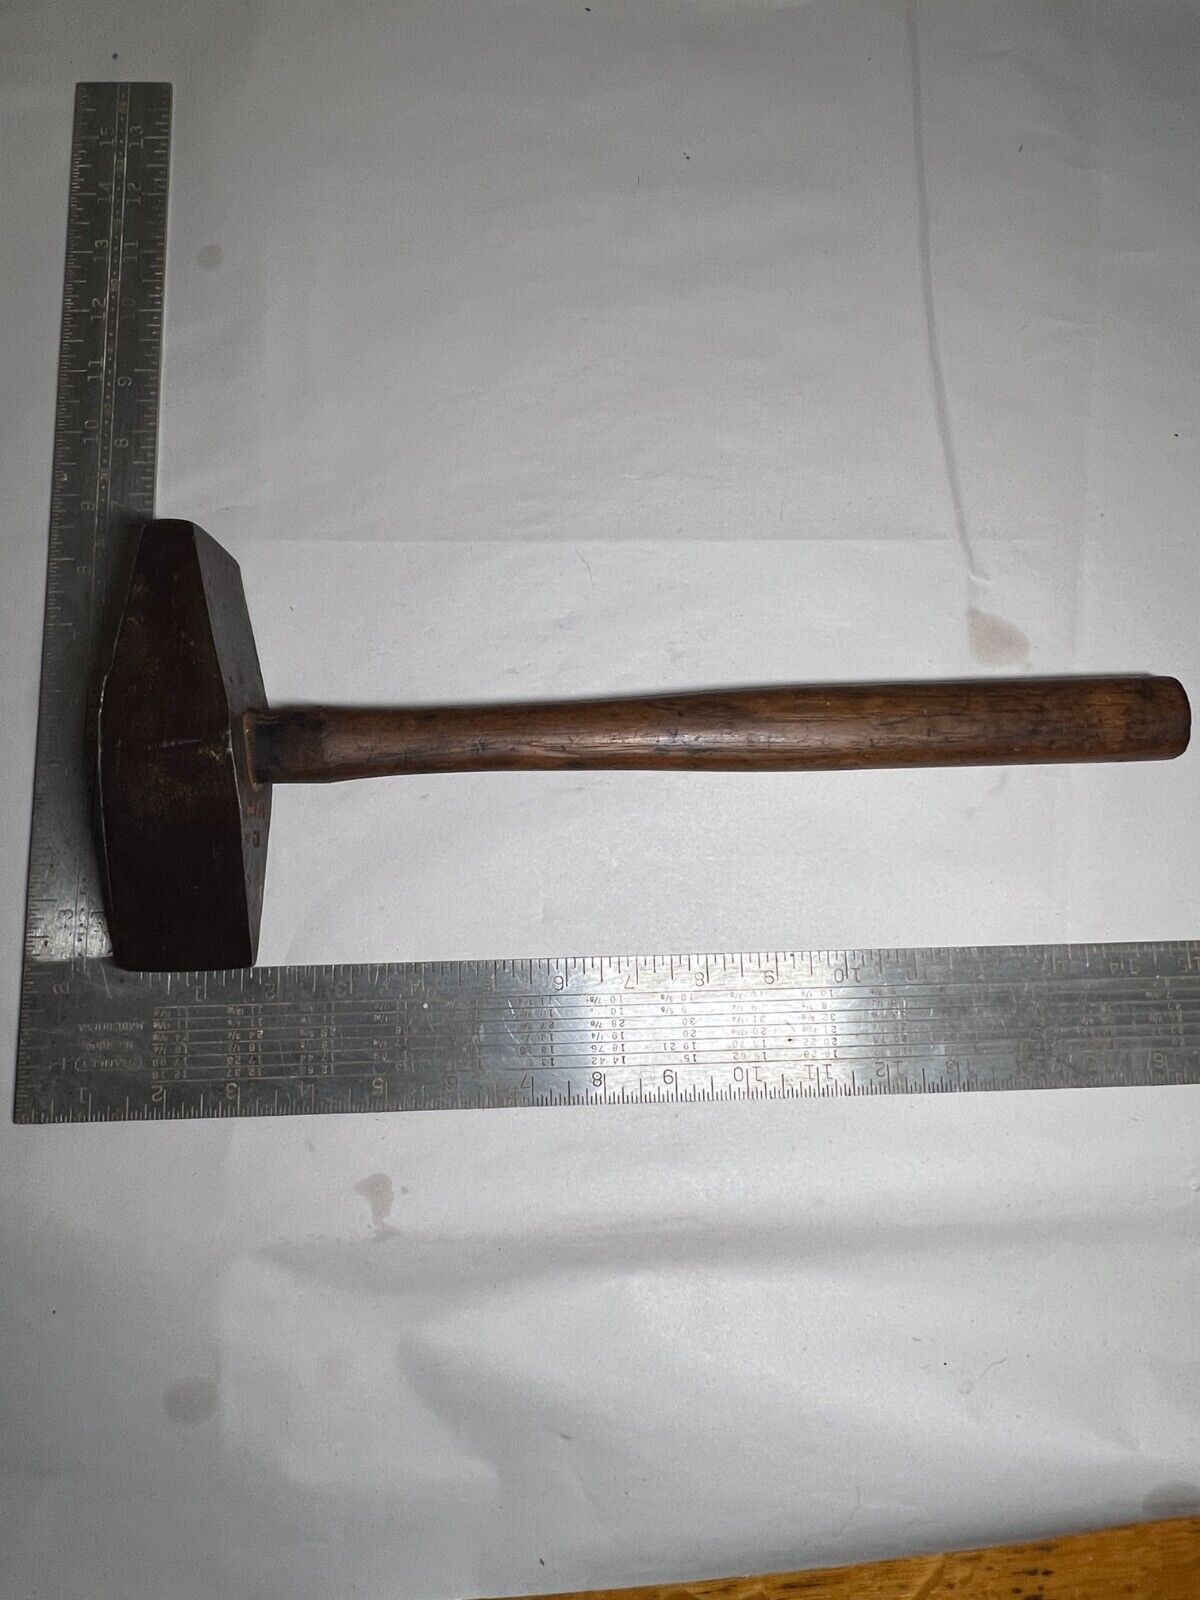 ANTIQUE E. C. ATKINS SAW HAMMER INDIANAPOLIS IND LOGGING COLLECTIBLE NICE 3.8LBS